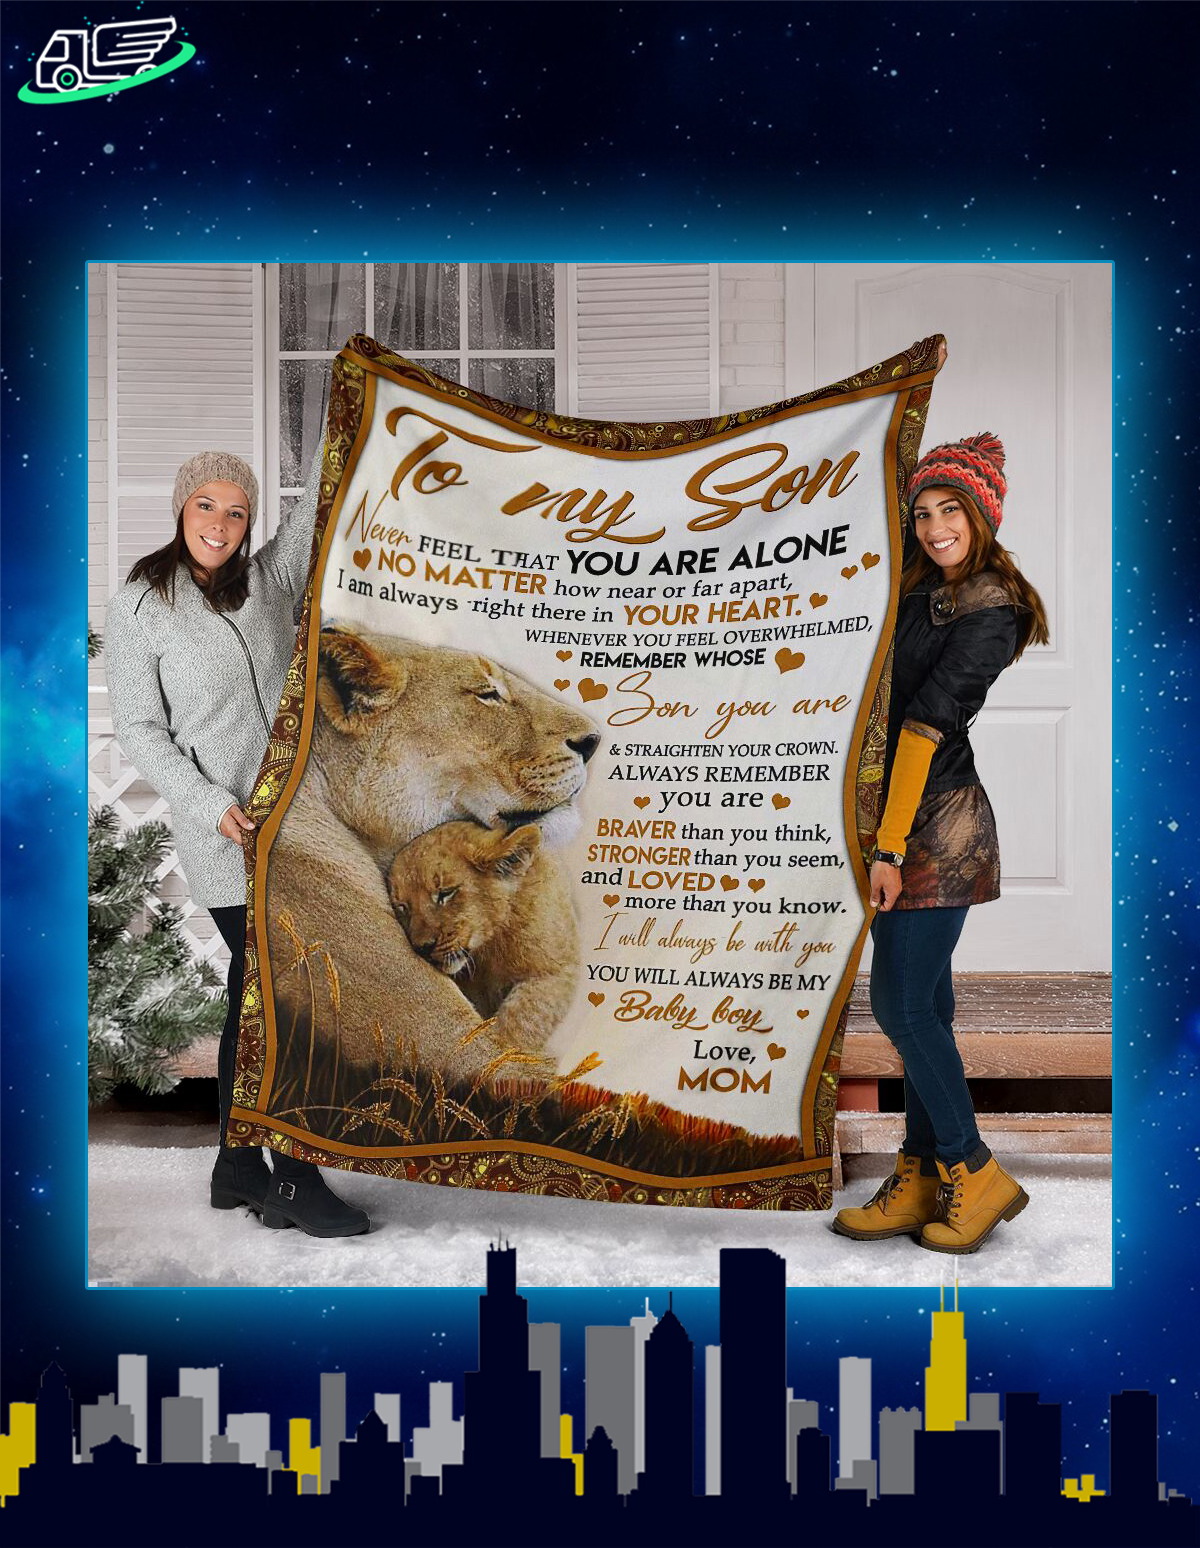 Lion to my son never feel that you are alone blanket